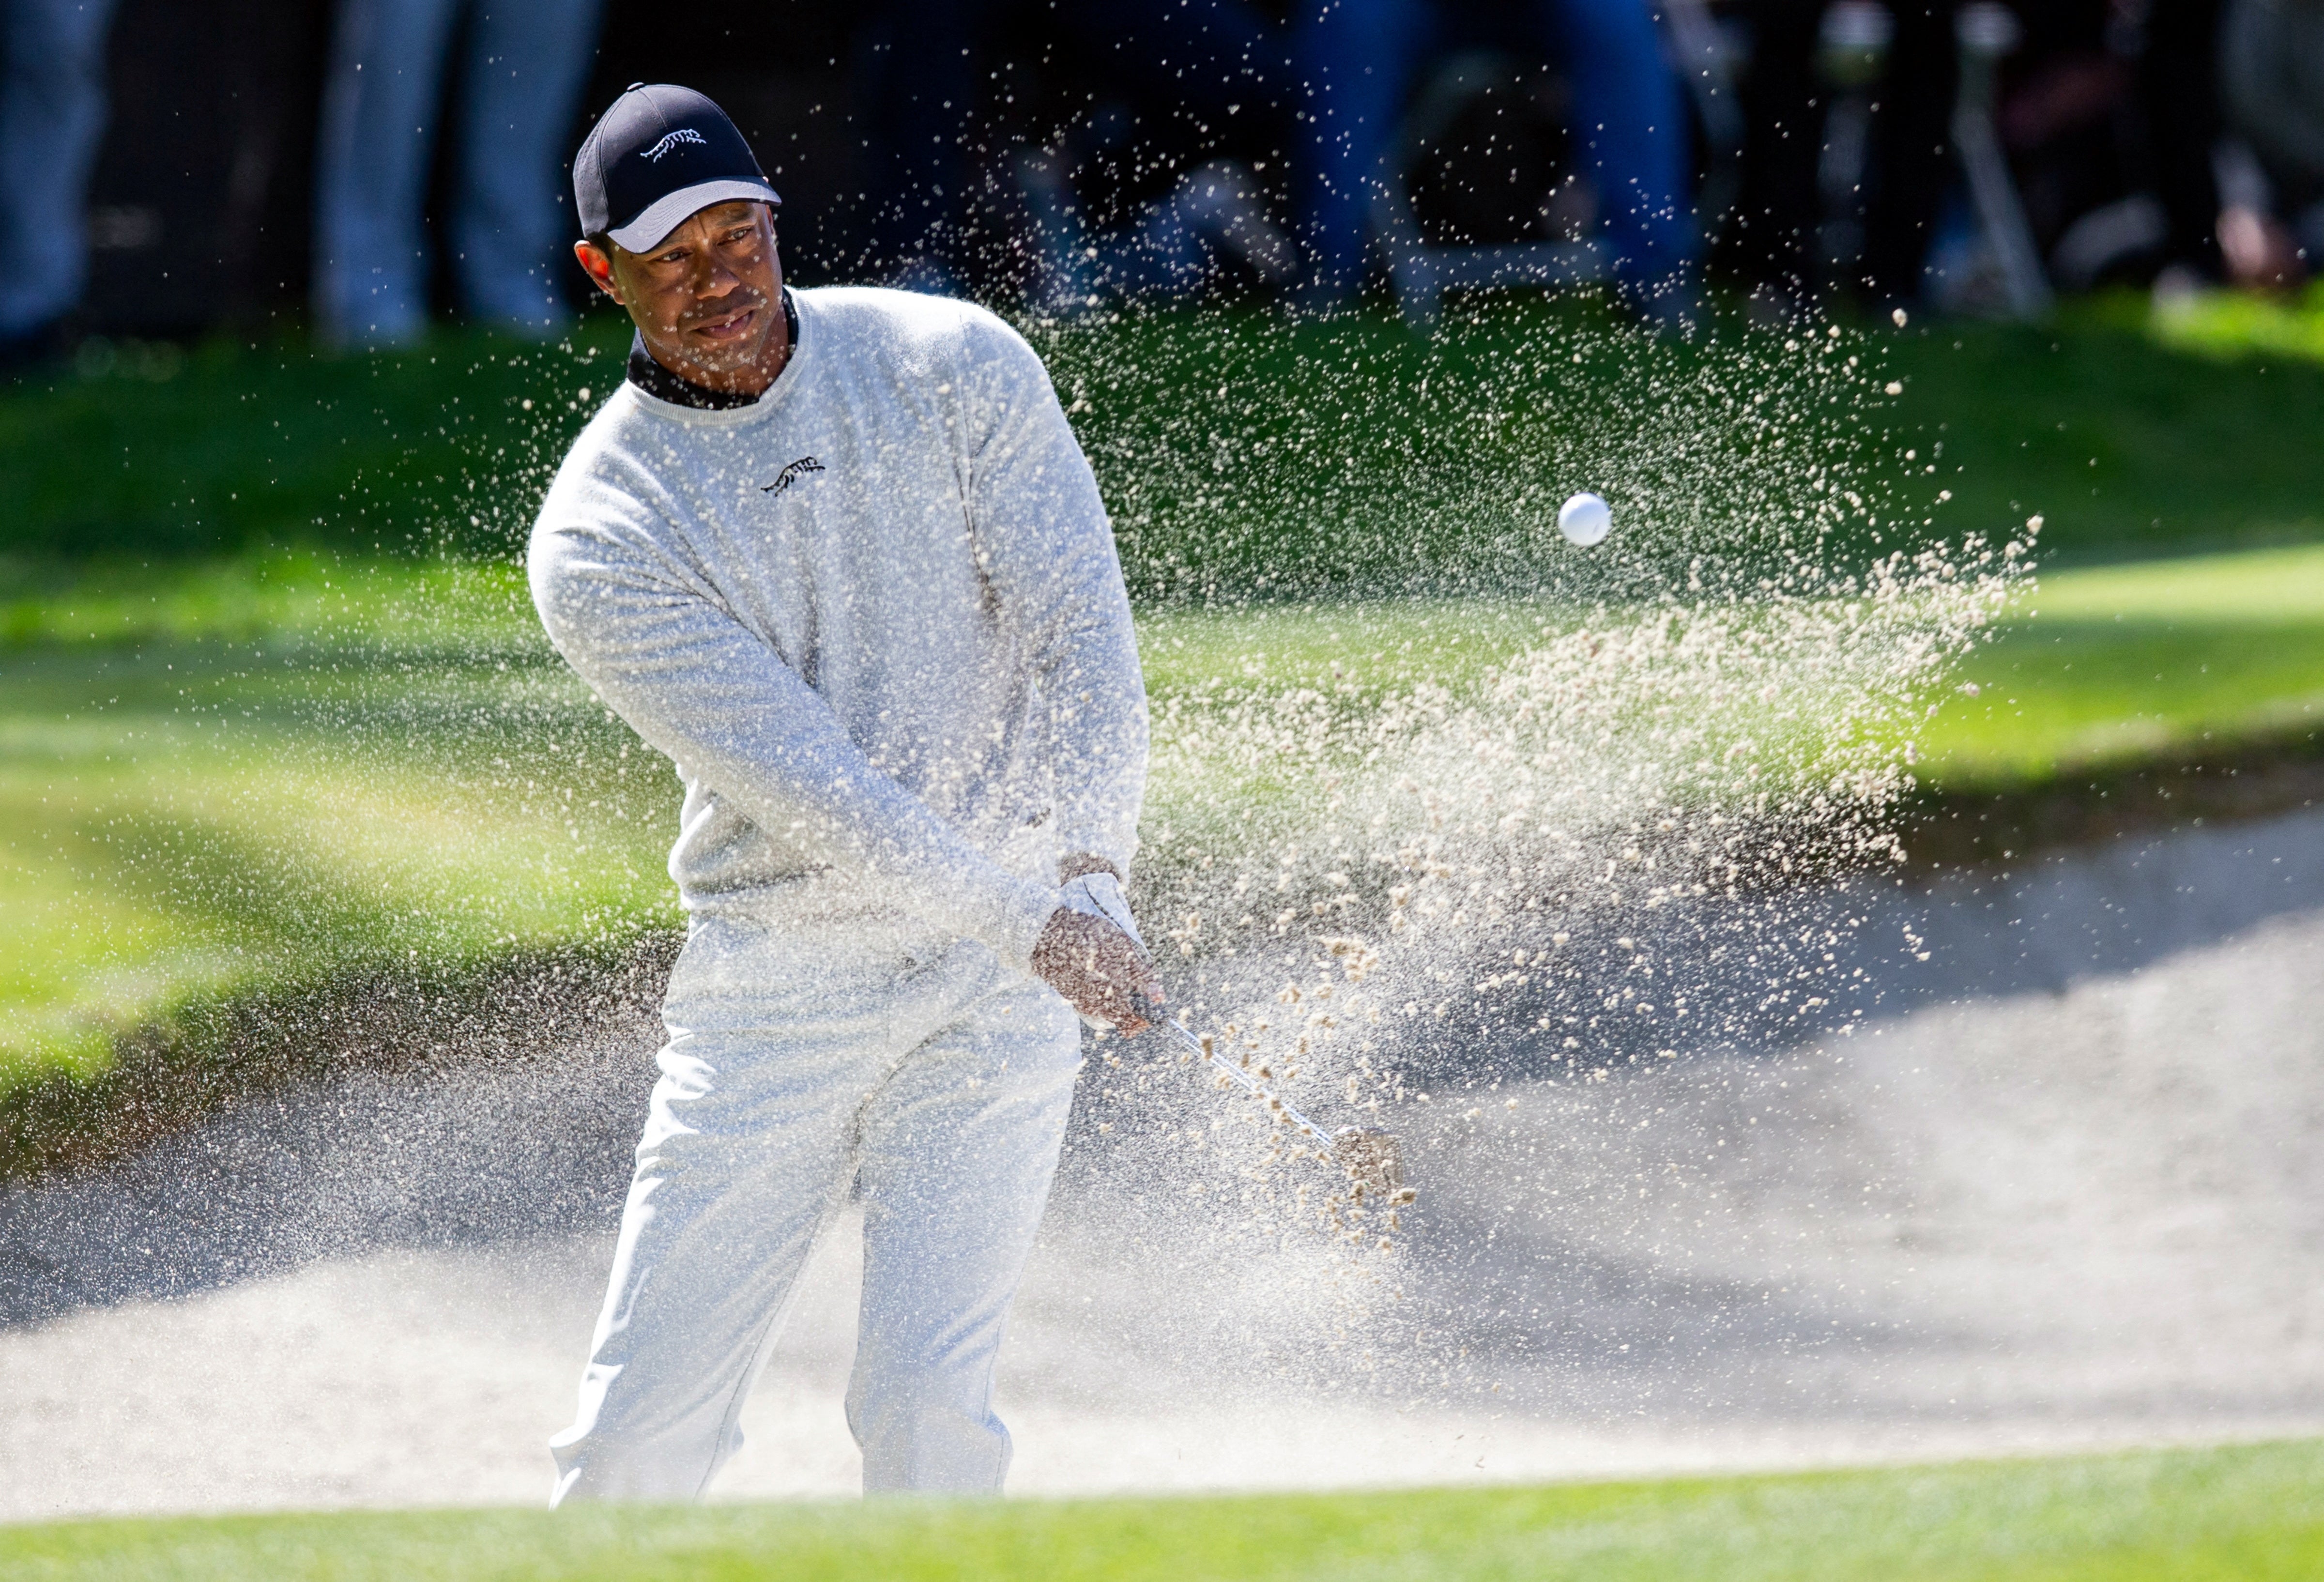 Tiger Woods made his return to golf at the Genesis Invitational in California